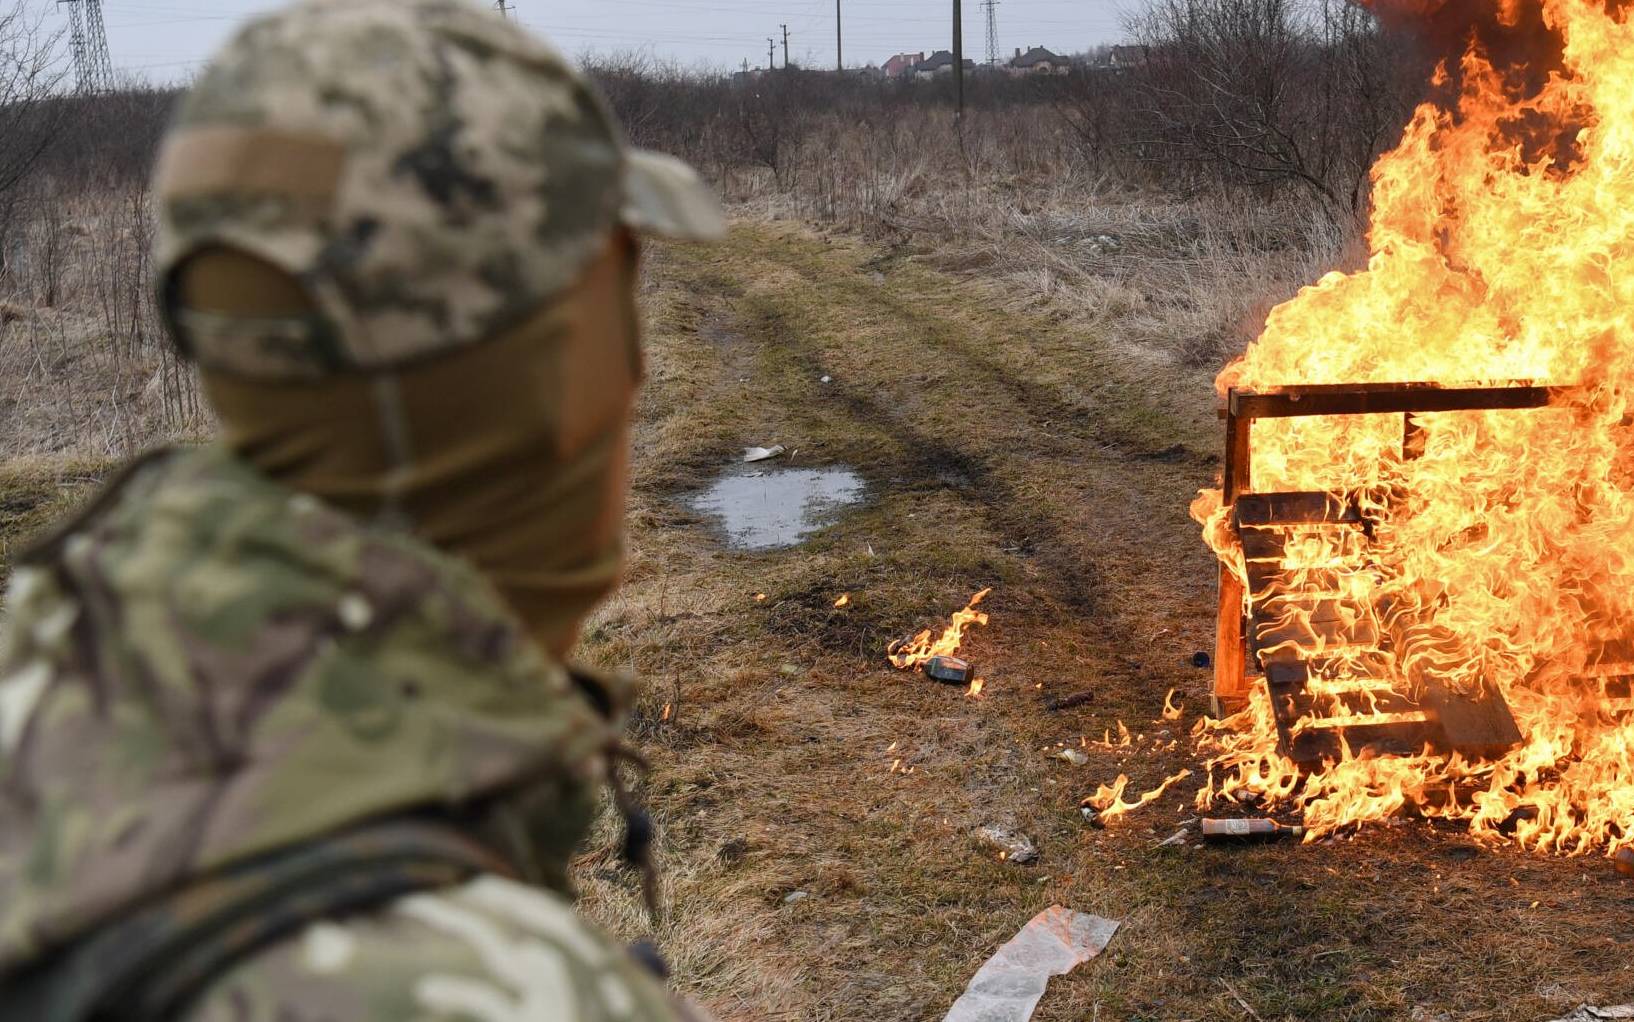 A Ukrainian soldier looks at flames after throwing a cocktail Molotovs during a self-defence civilian course on the outskirts of Lviv, western Ukraine, on March 4, 2022. - The Russian army occupied on March 4, 2022 the Ukrainian nuclear power plant of Zaporozhie (south), the largest in Europe, where bombings in the night have raised fears of a disaster as more than 1.2 million people have fled Ukraine into neighbouring countries since Russia launched its full-scale invasion on February 24, United Nations figures showed on March 4, 2022. (Photo by Daniel LEAL / AFP)